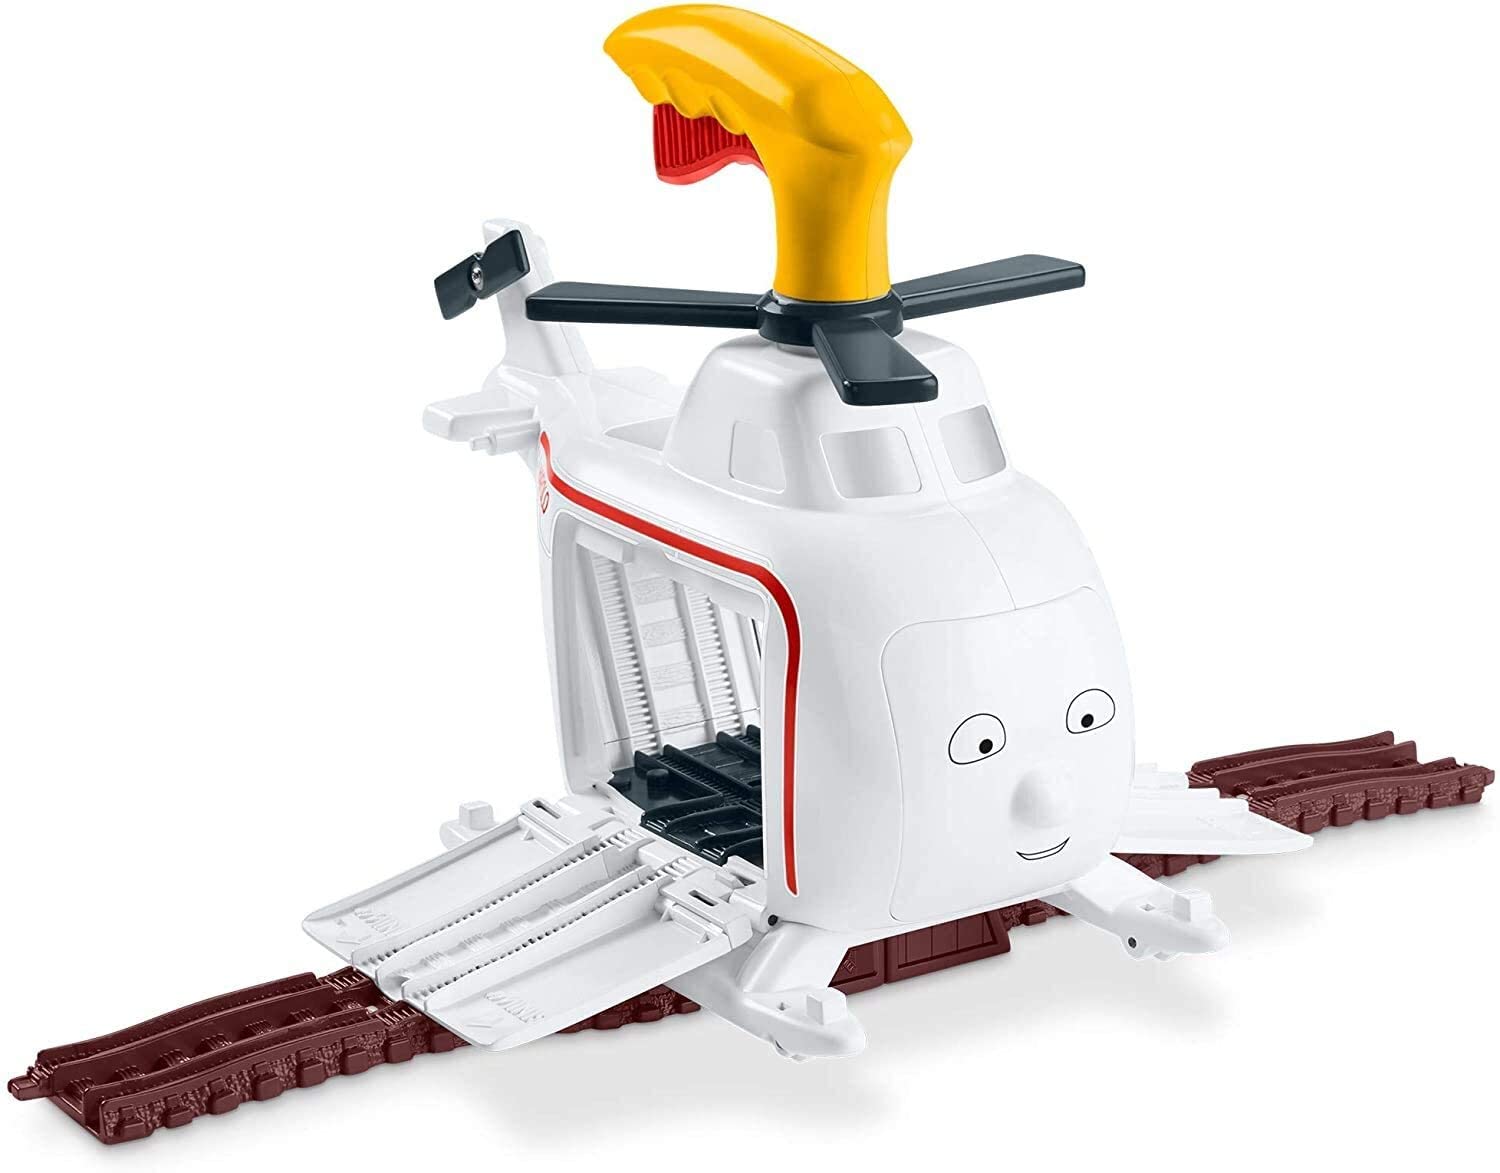 Thomas & Friends Press 'n Spin Harold Helicopter $9.49